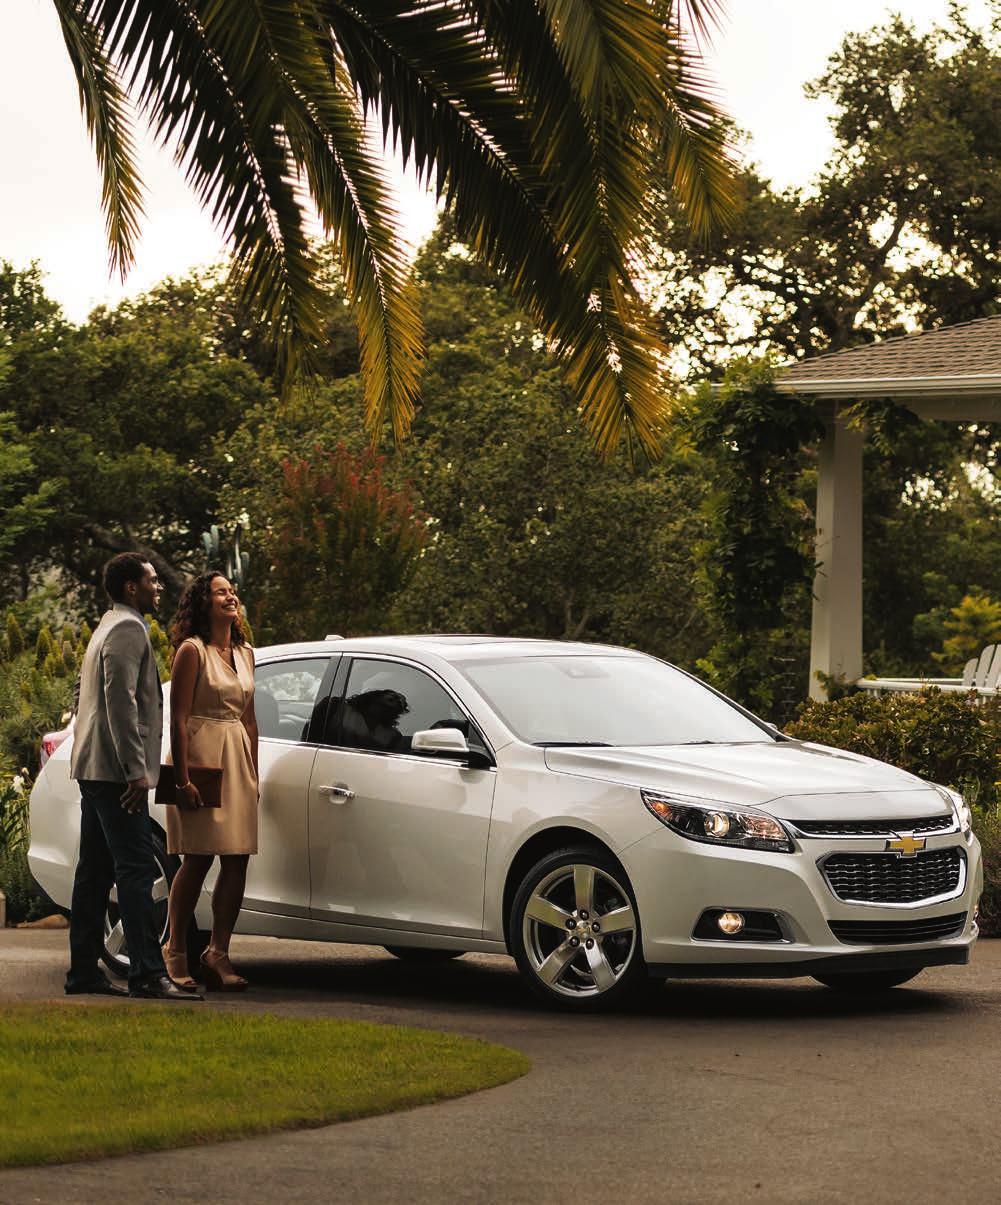 peace of mind We re with you all the way. Chevrolet Complete Care reflects our commitment to you and your new Malibu.